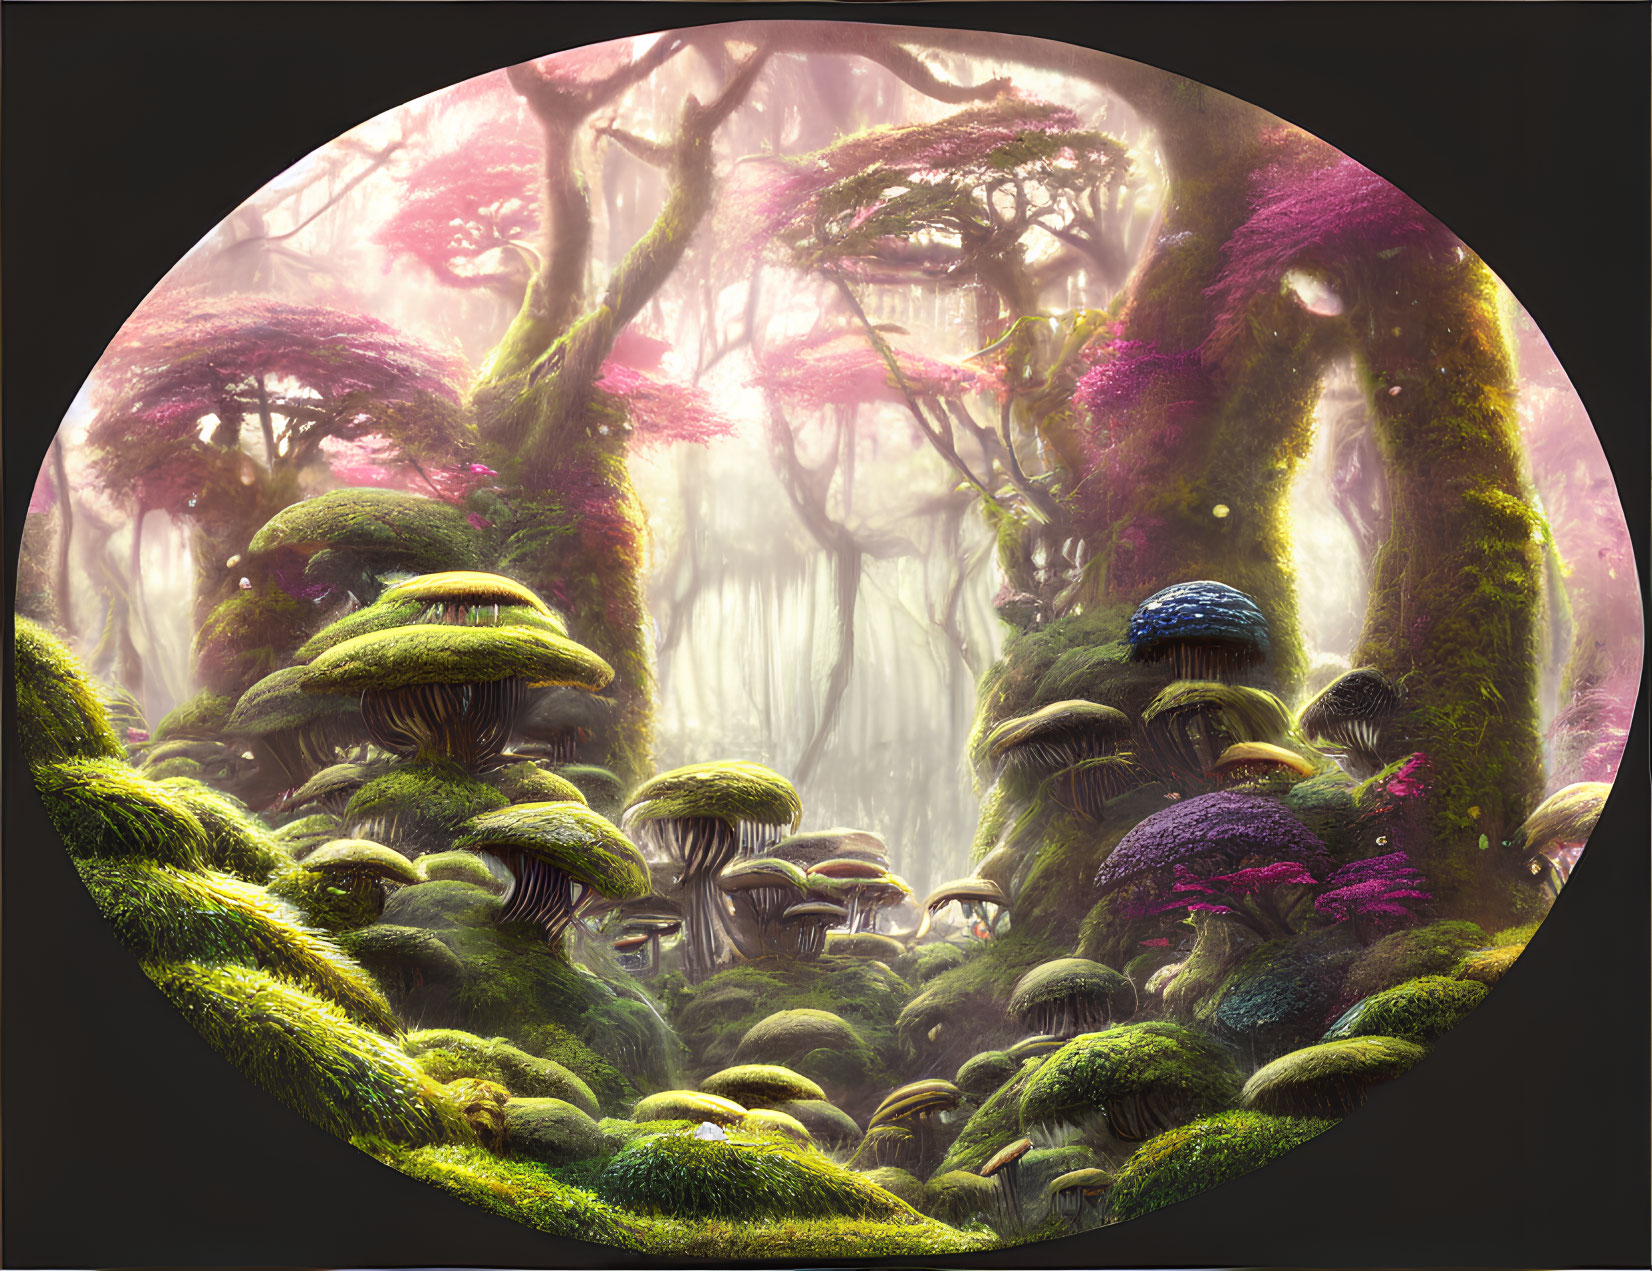 Enchanting forest with giant mushrooms and misty pink light.